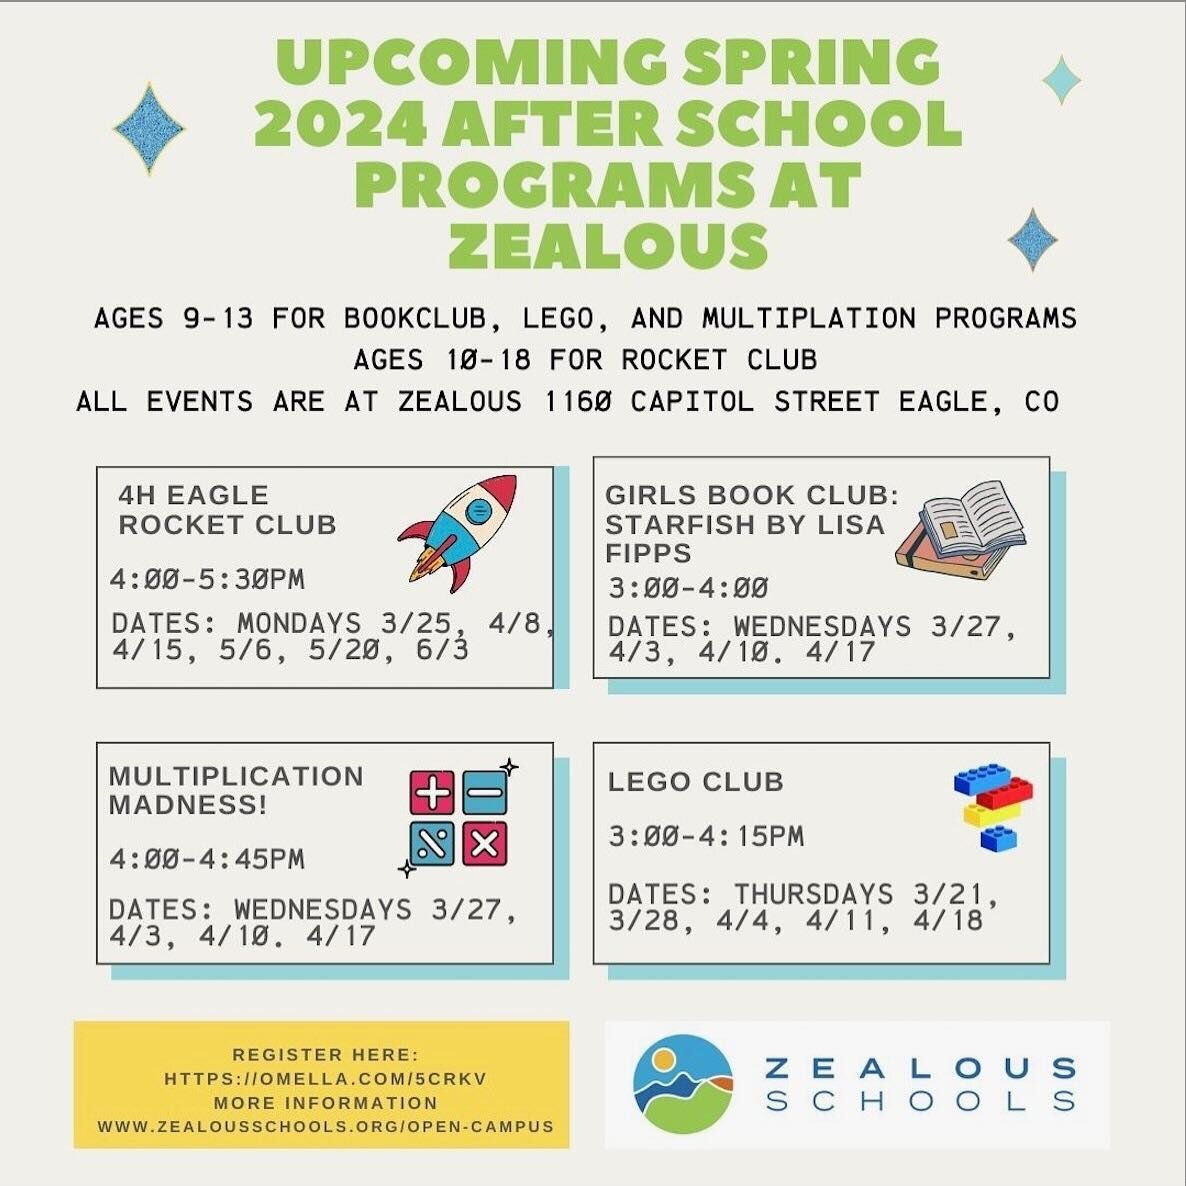 Zealous Spring After School Programs are ready to roll! 

4H Rocket Club: this is a partnership with 4H, CSU, and Zealous Schools. Learn how to design, build, and demonstrate model rockets! 

Girls Bookclub: Come read and discuss the book Starfish. T